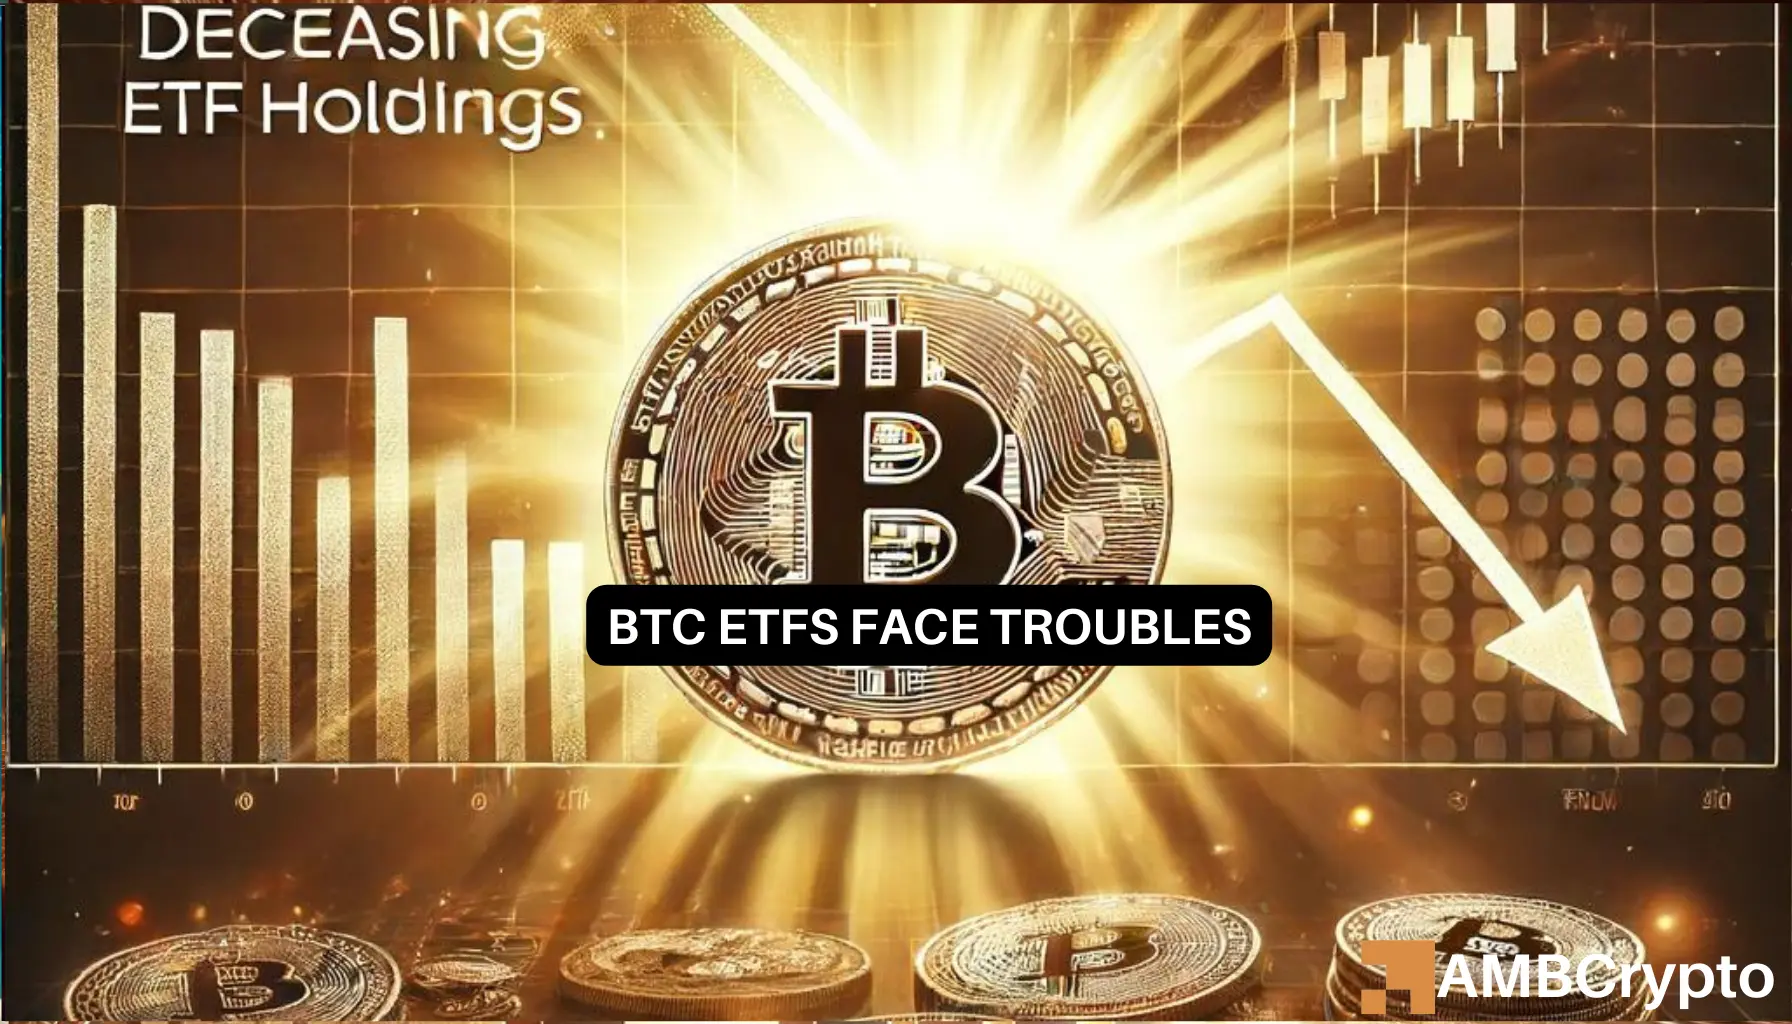 Bitcoin ETF holdings dip: What does it mean for BTC’s future?